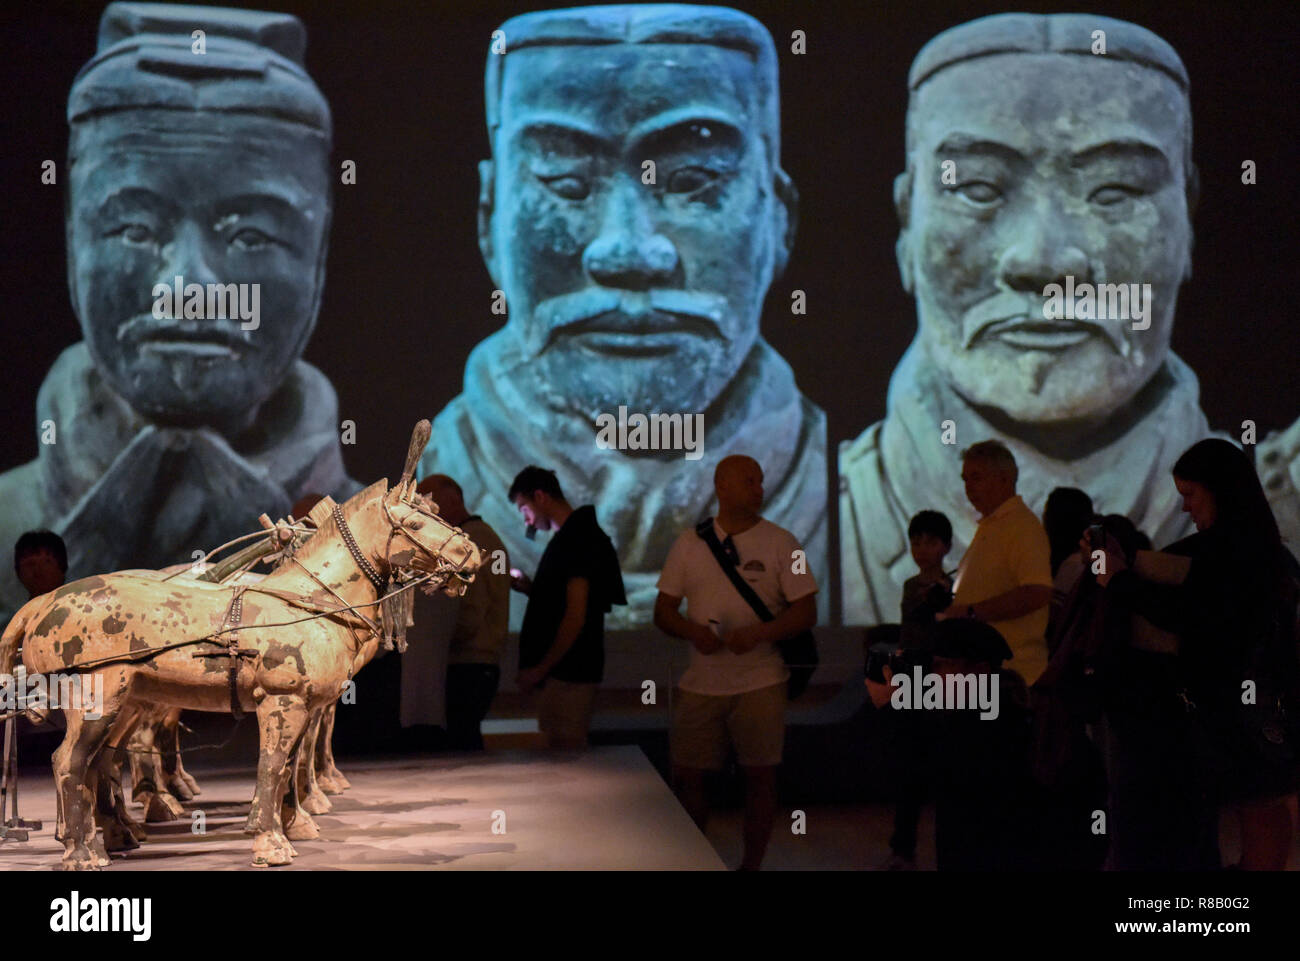 (181215) -- WELLINGTON, Dec. 15, 2018 (Xinhua) -- Visitors wait for entering the exhibition Terracotta Warriors: Guardians of Immortality at the National Museum of New Zealand in Wellington, New Zealand, on Dec. 15, 2018. The landmark exhibition of Terracotta Warriors: Guardians of Immortality opened to public on Saturday at the National Museum of New Zealand.       The exhibition features eight warriors standing 180 cm tall, and two full-size horses from the famous terracotta army, as well as two half-size replica bronze horse-drawn chariots. Also on display are more than 160 exquisite works  Stock Photo